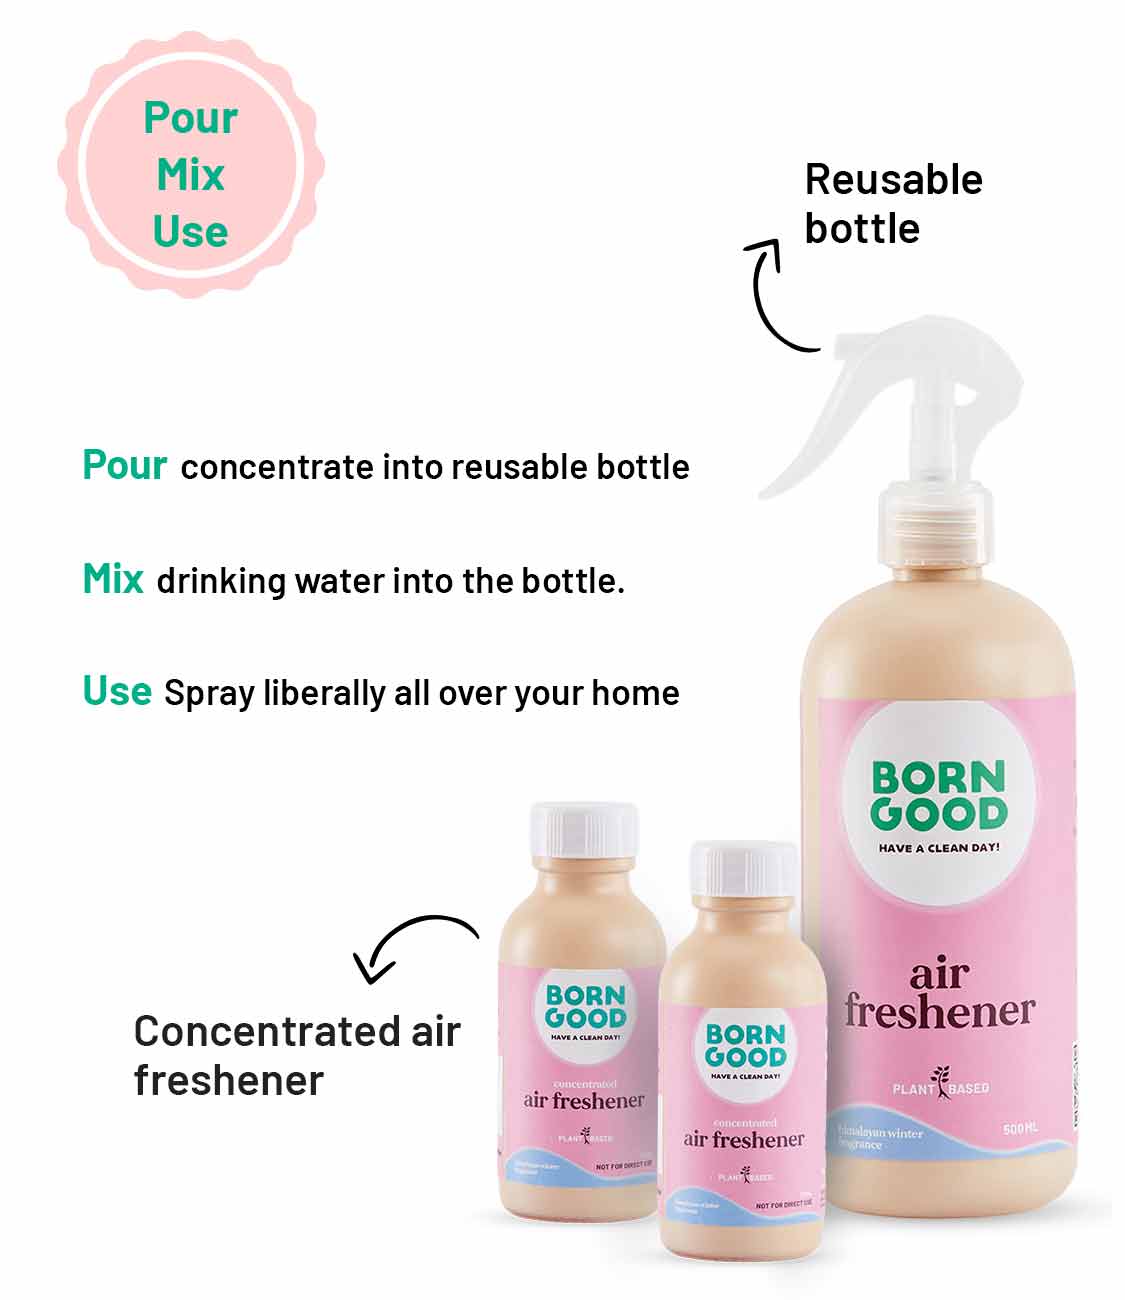 Born Good Plant-based Air Freshener (Himalayan Winter) Concentrate Kit (Makes 1 L)